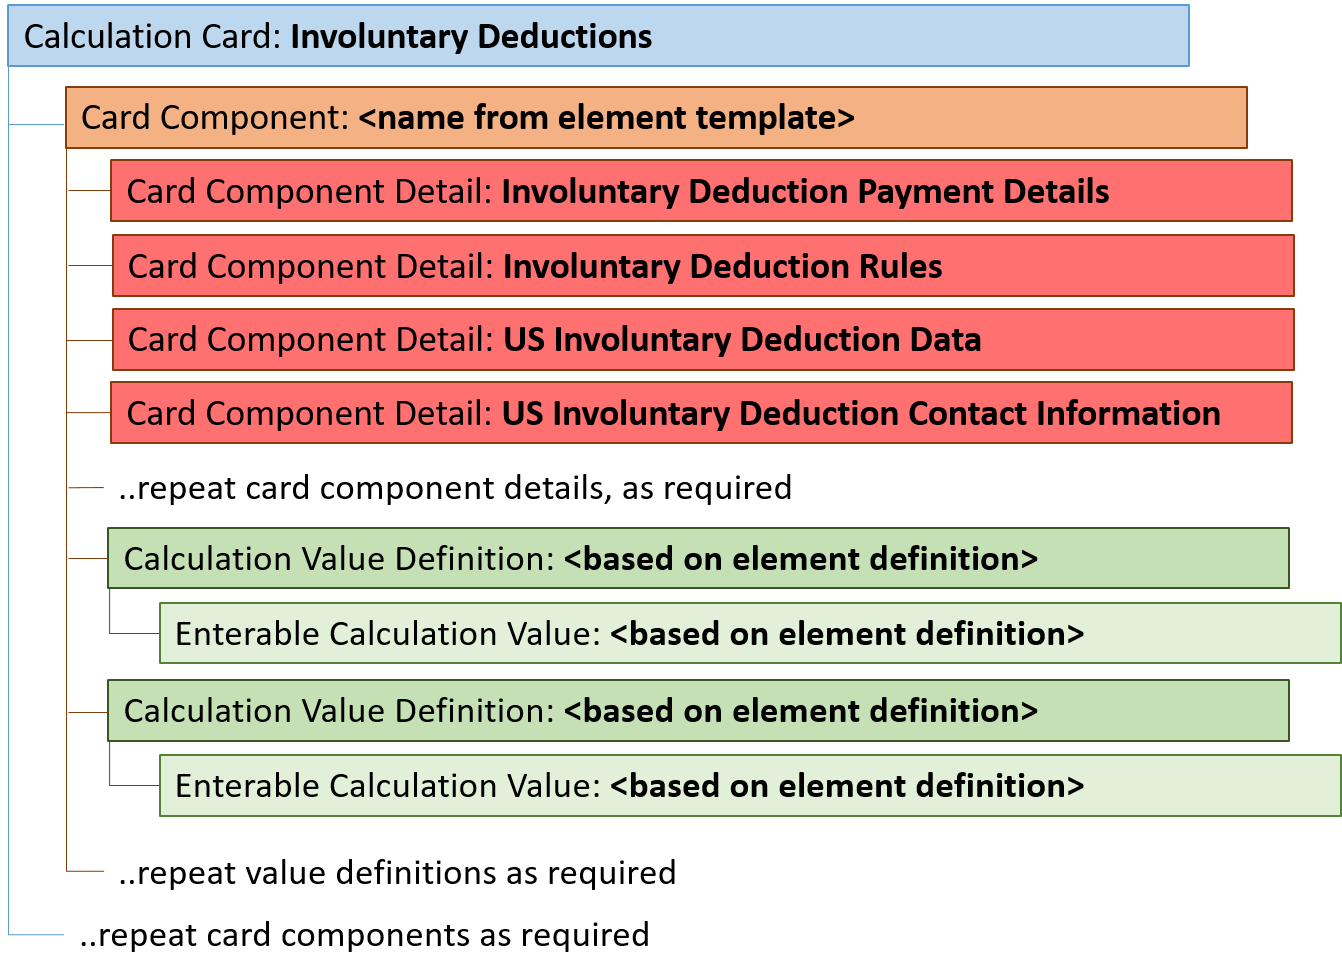 HDL US Involuntary Deductions Hierarchy